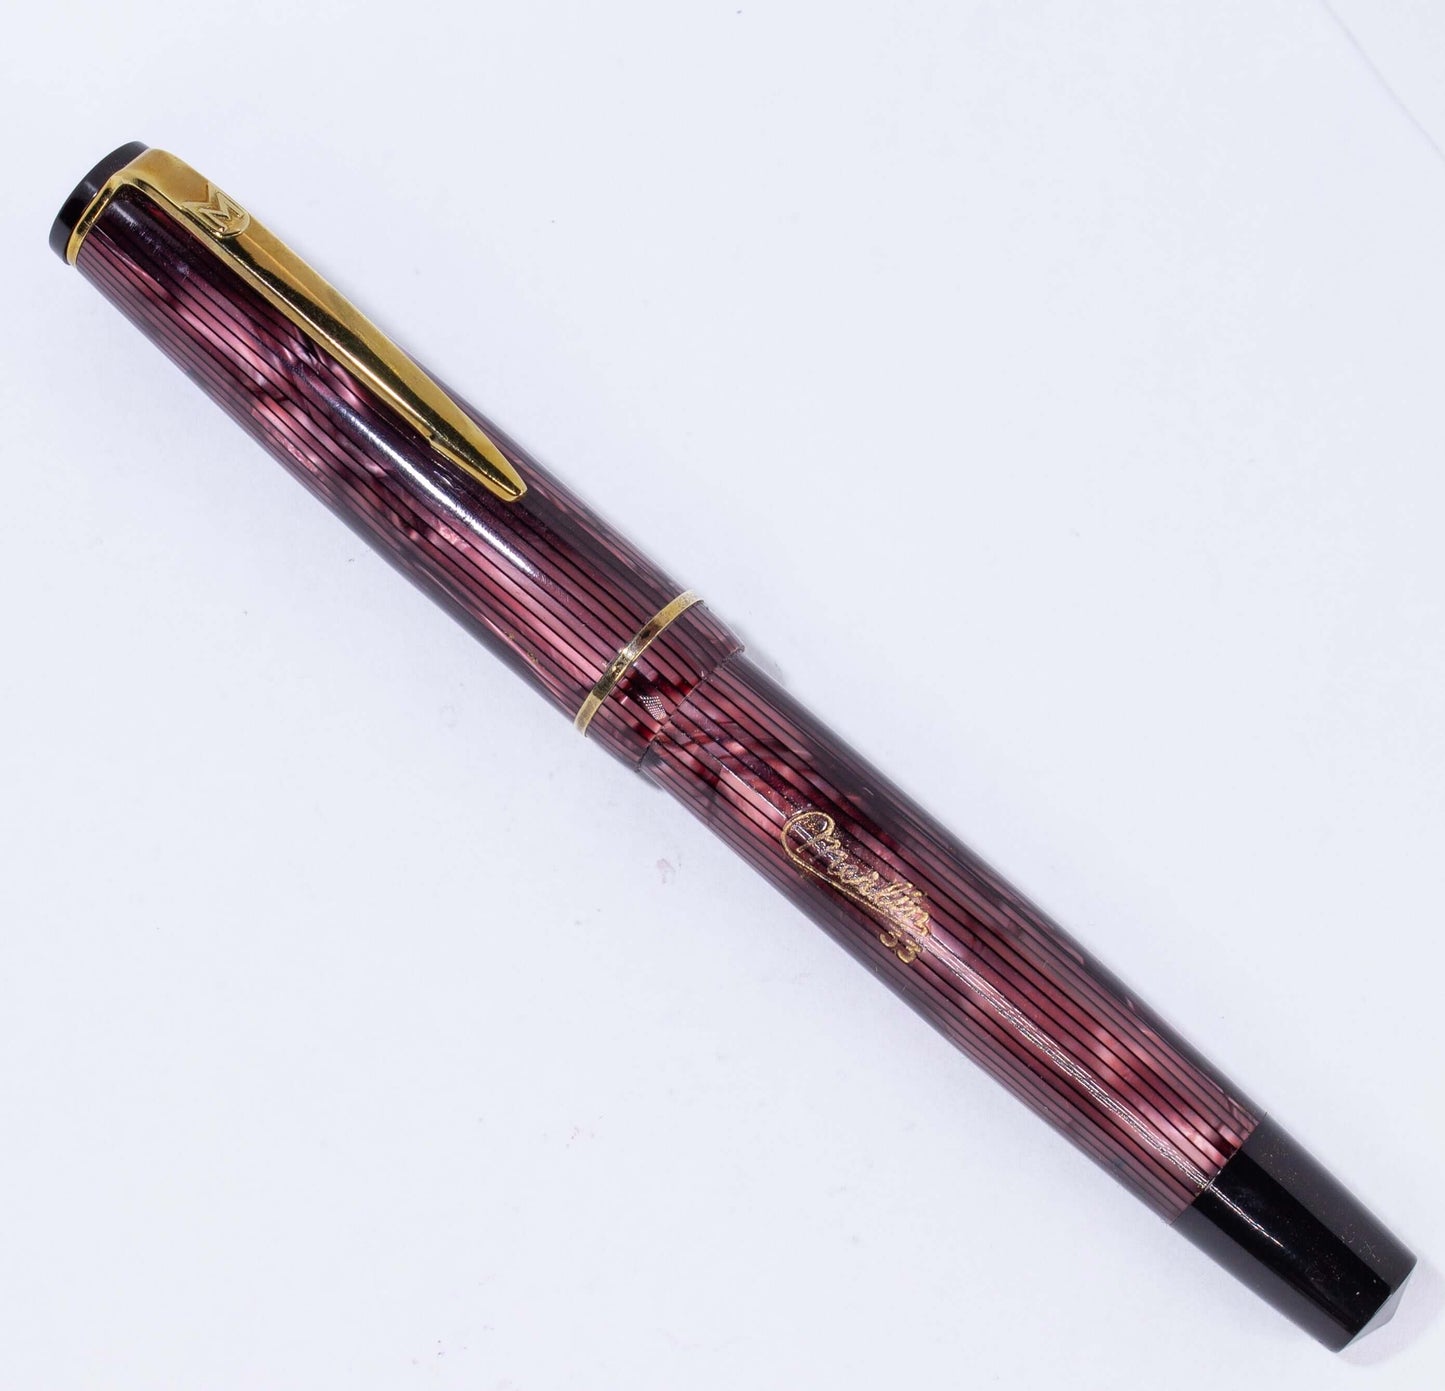 Merlin 33 Fountain Pen, Pink Stripe, Gold Trim 14K Merlin Nib, Flexible, Button Filler with New Sac Installed Type: Vintage Button Filler Fountain Pen Product Name: Merlin Manufacture Year: 1950s, made in Europe Length: 4 3/4 Filling System: Button Filler